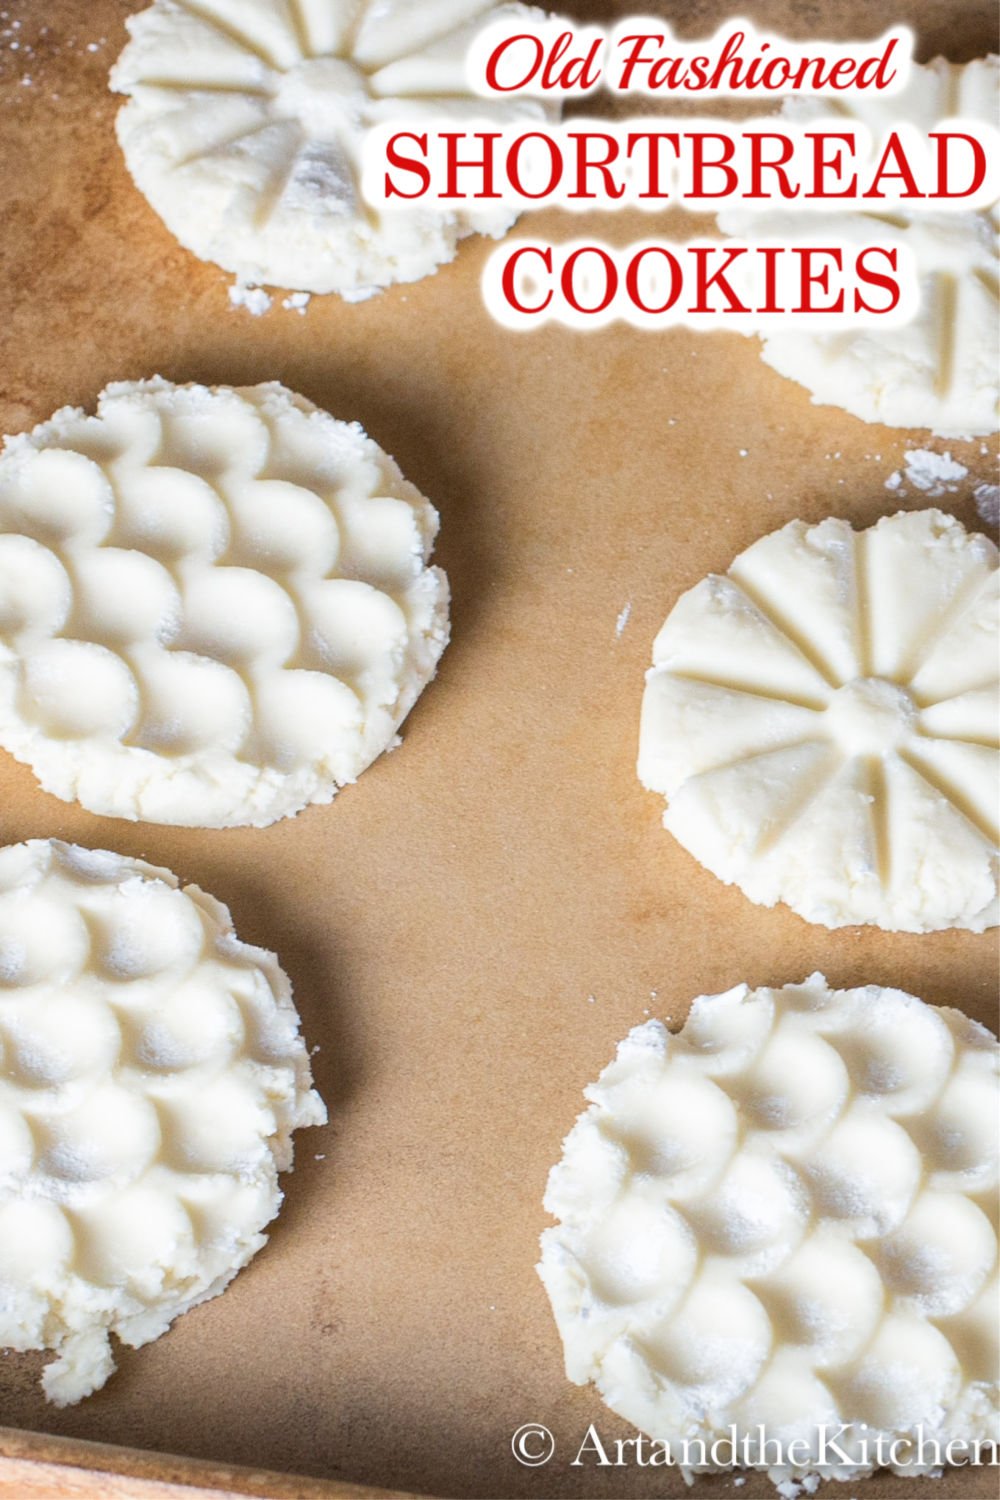 OLD FASHIONED SHORTBREAD COOKIES